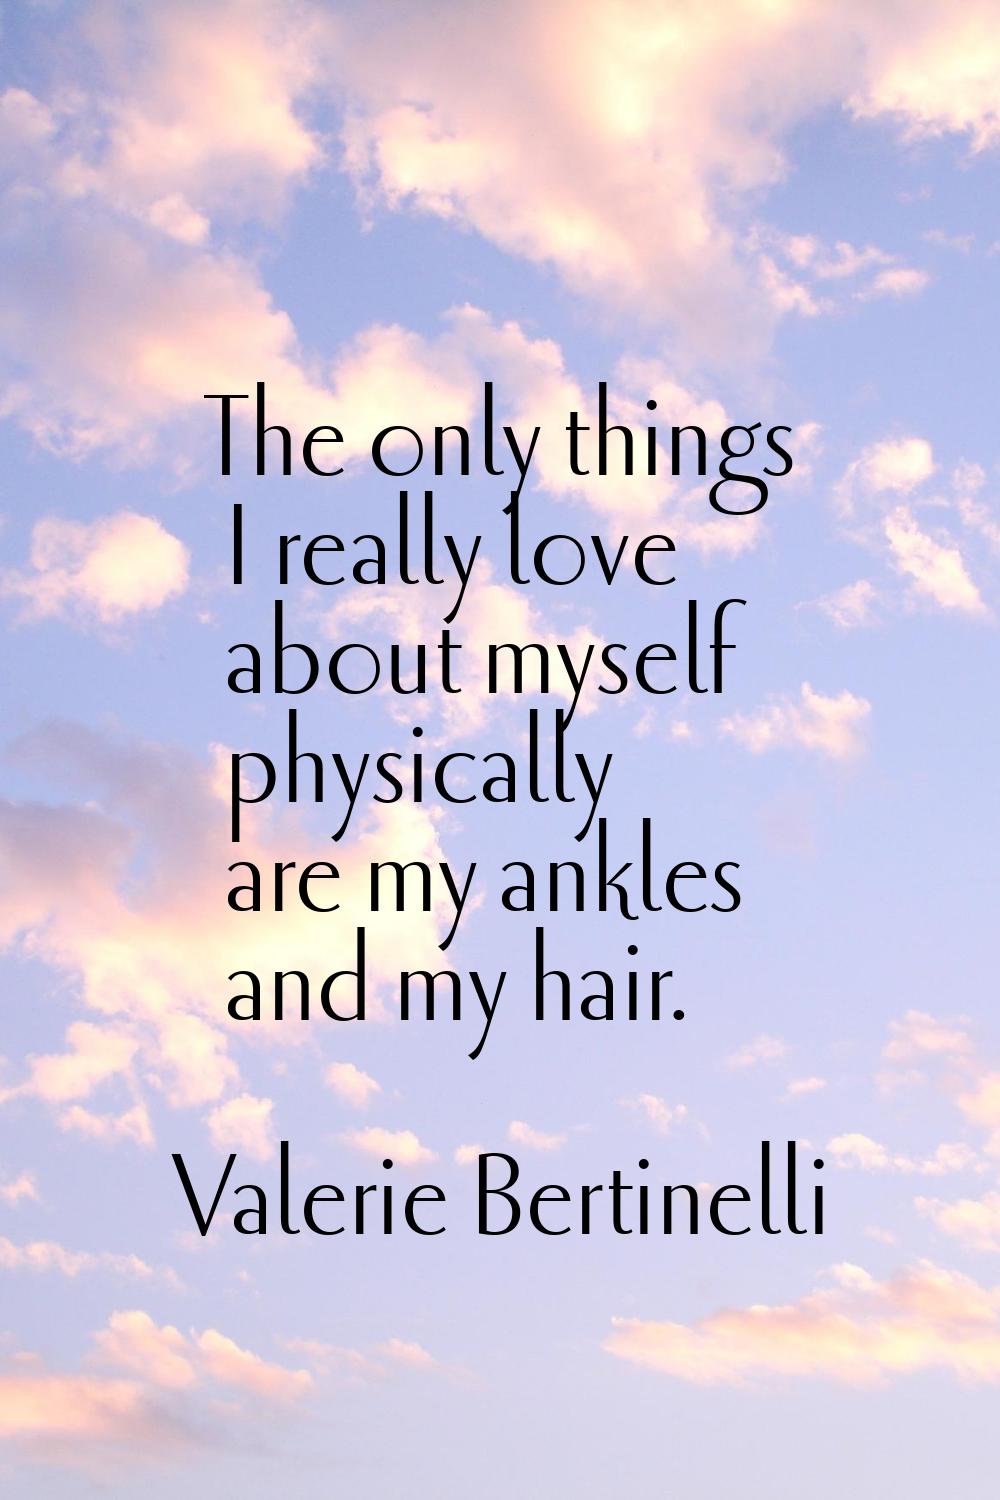 The only things I really love about myself physically are my ankles and my hair.